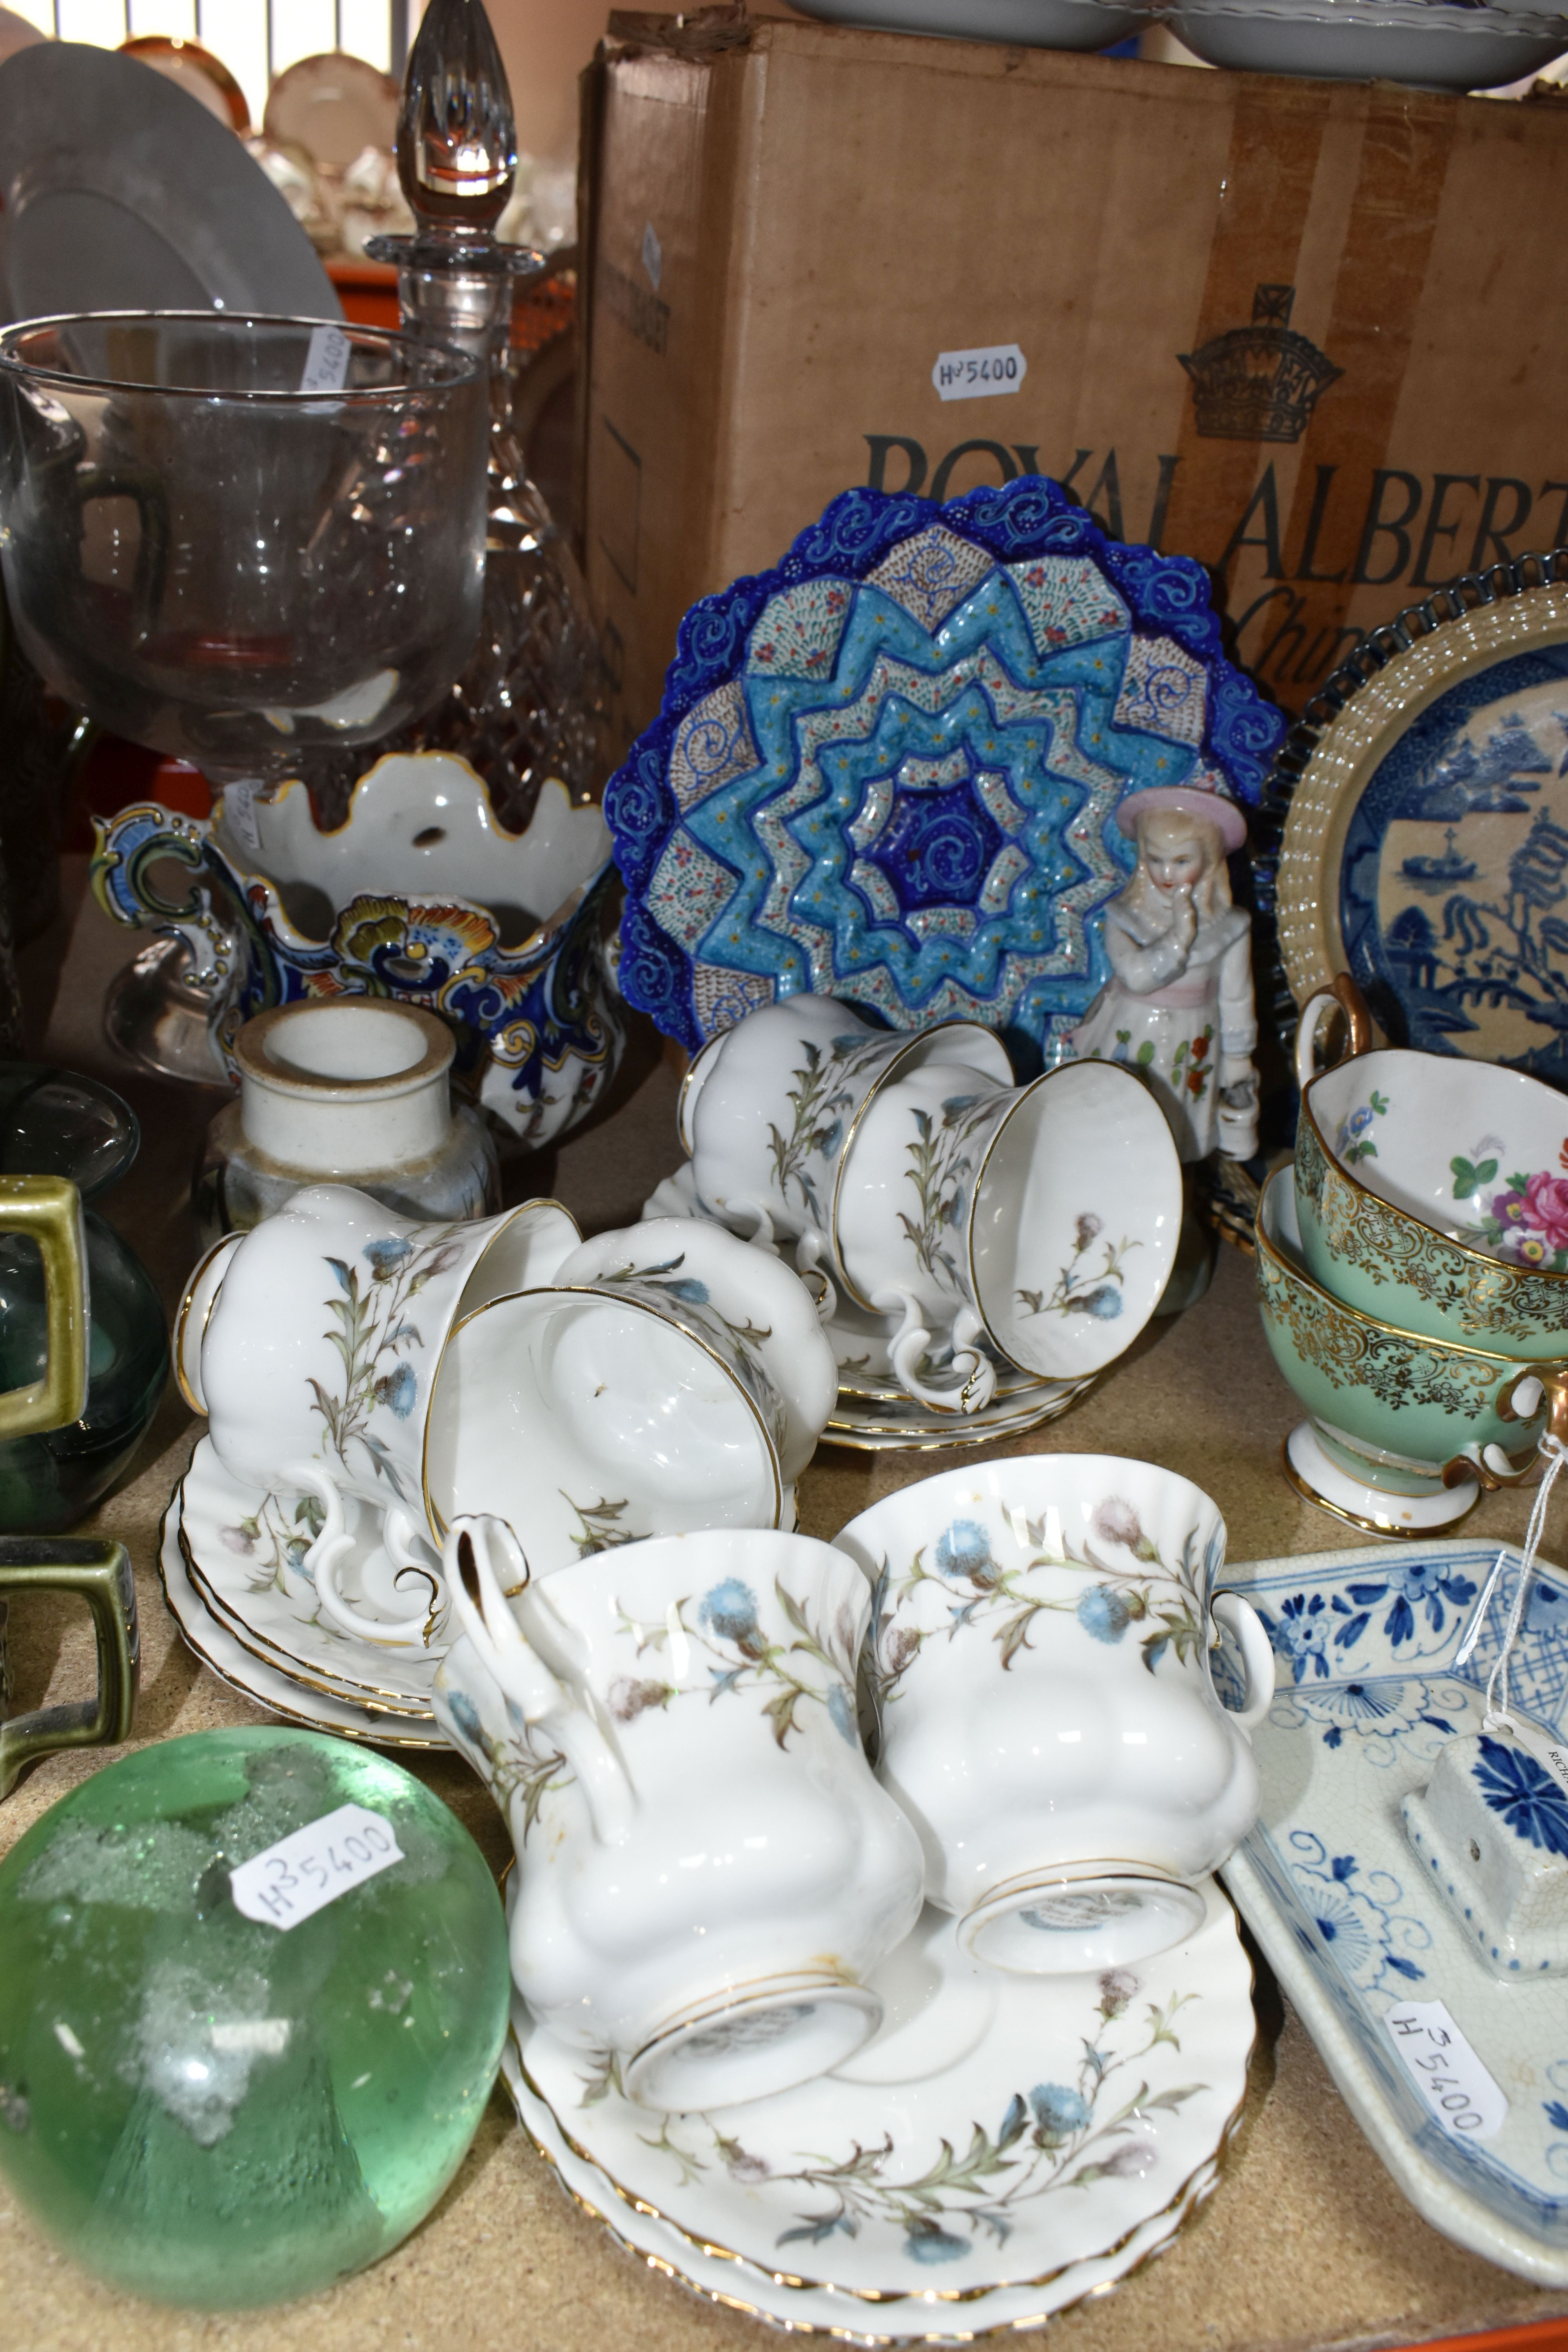 A VARIETY OF CERAMICS AND GLASSWARE INCLUDING A ROYAL ALBERT TEA SET, A VICTORIAN GLASS DUMP - Image 5 of 6